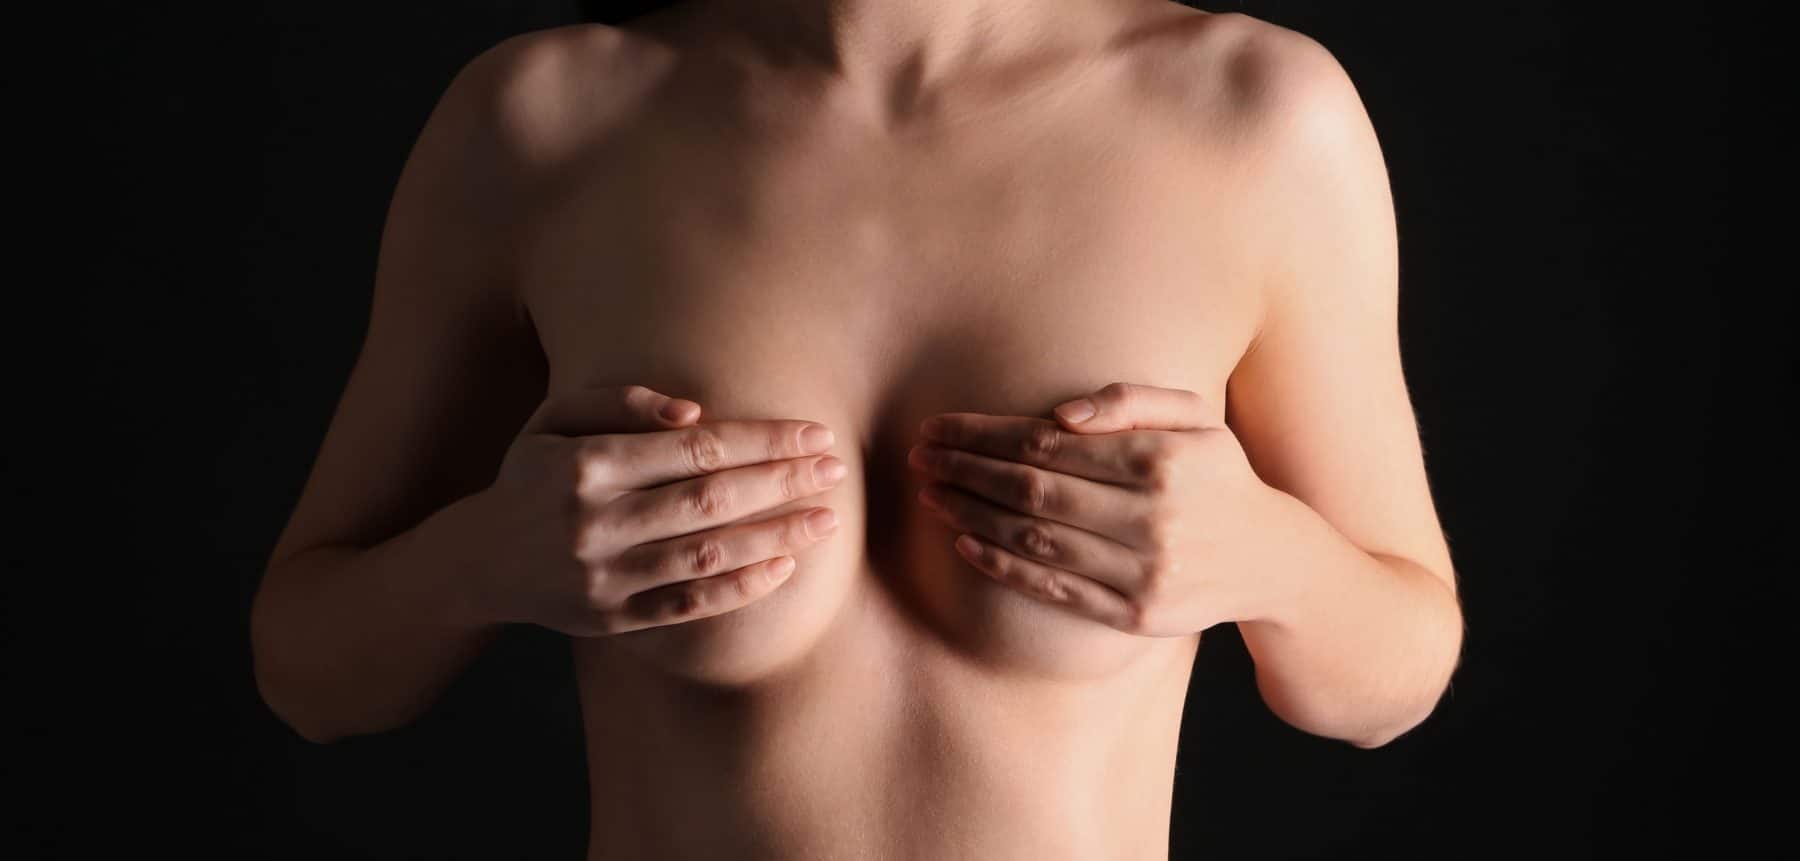 Can They Make Your Nipples Smaller During Breast Reduction?